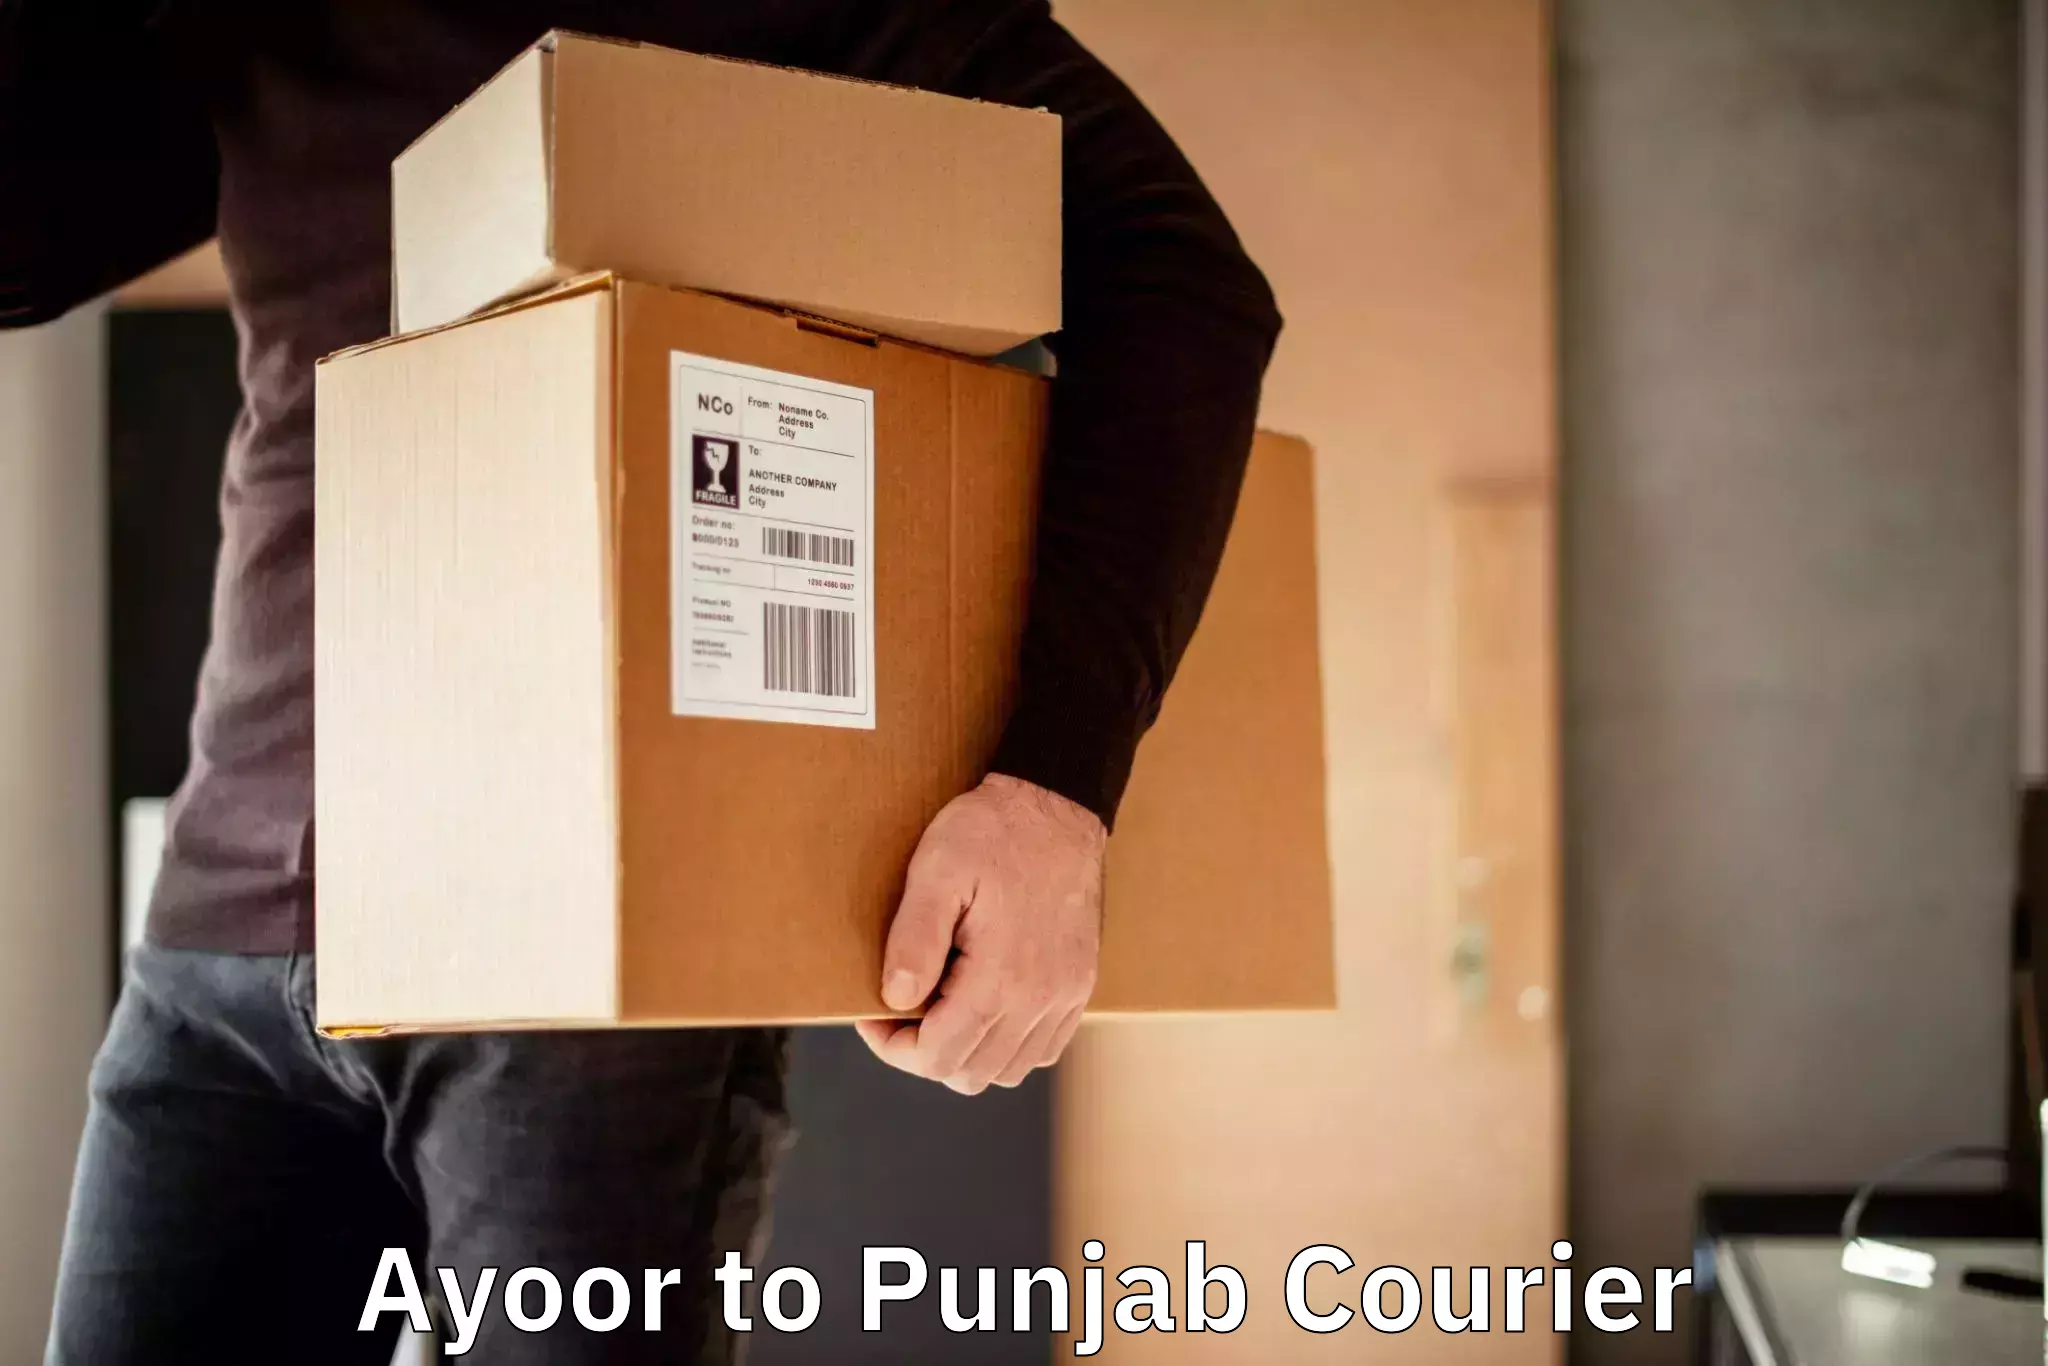 Express package services Ayoor to Khanna